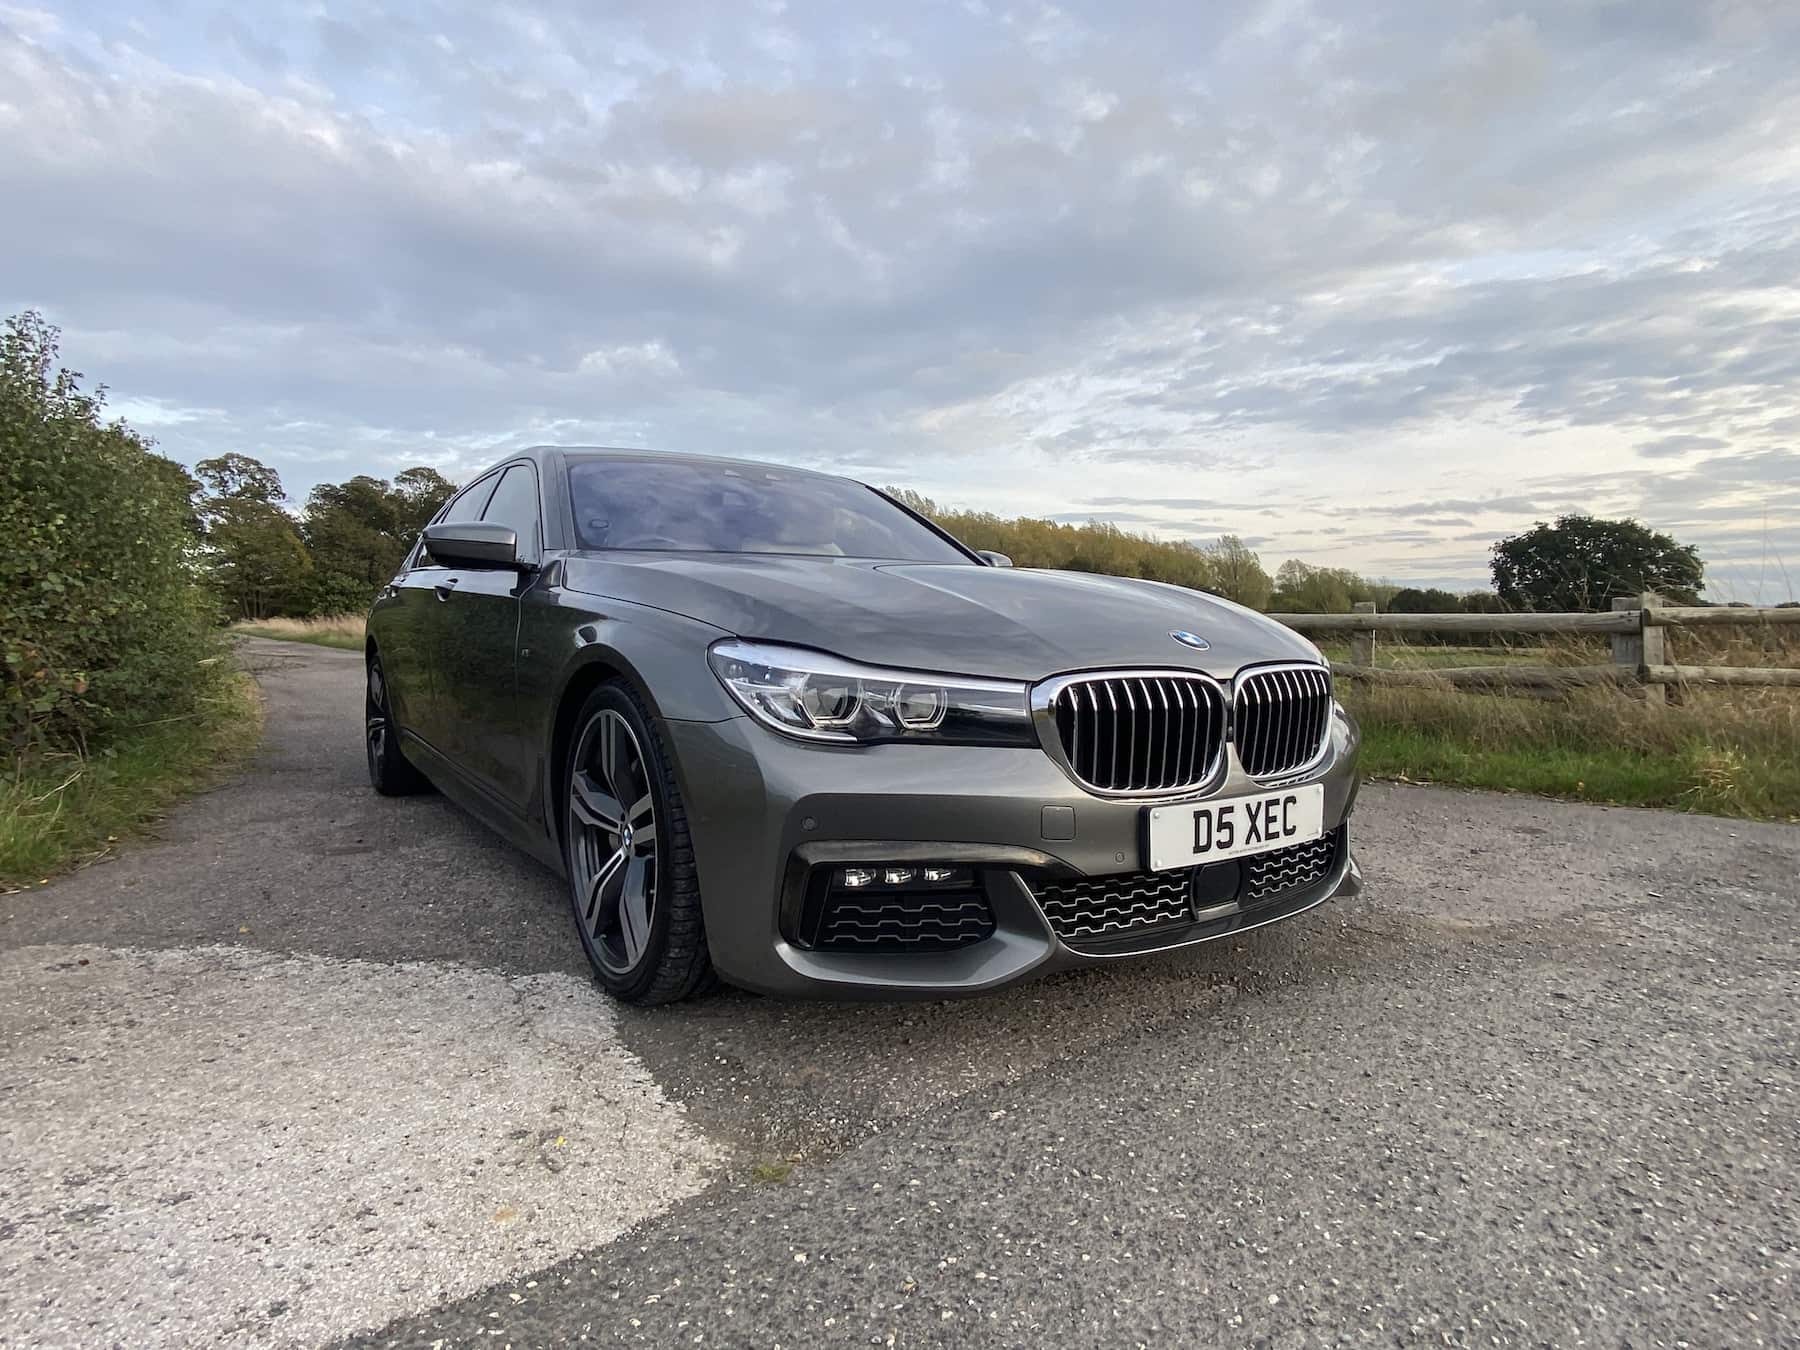 Our BMW 730 makes up part of A52 Executive Cars Derby Chauffeur Fleet